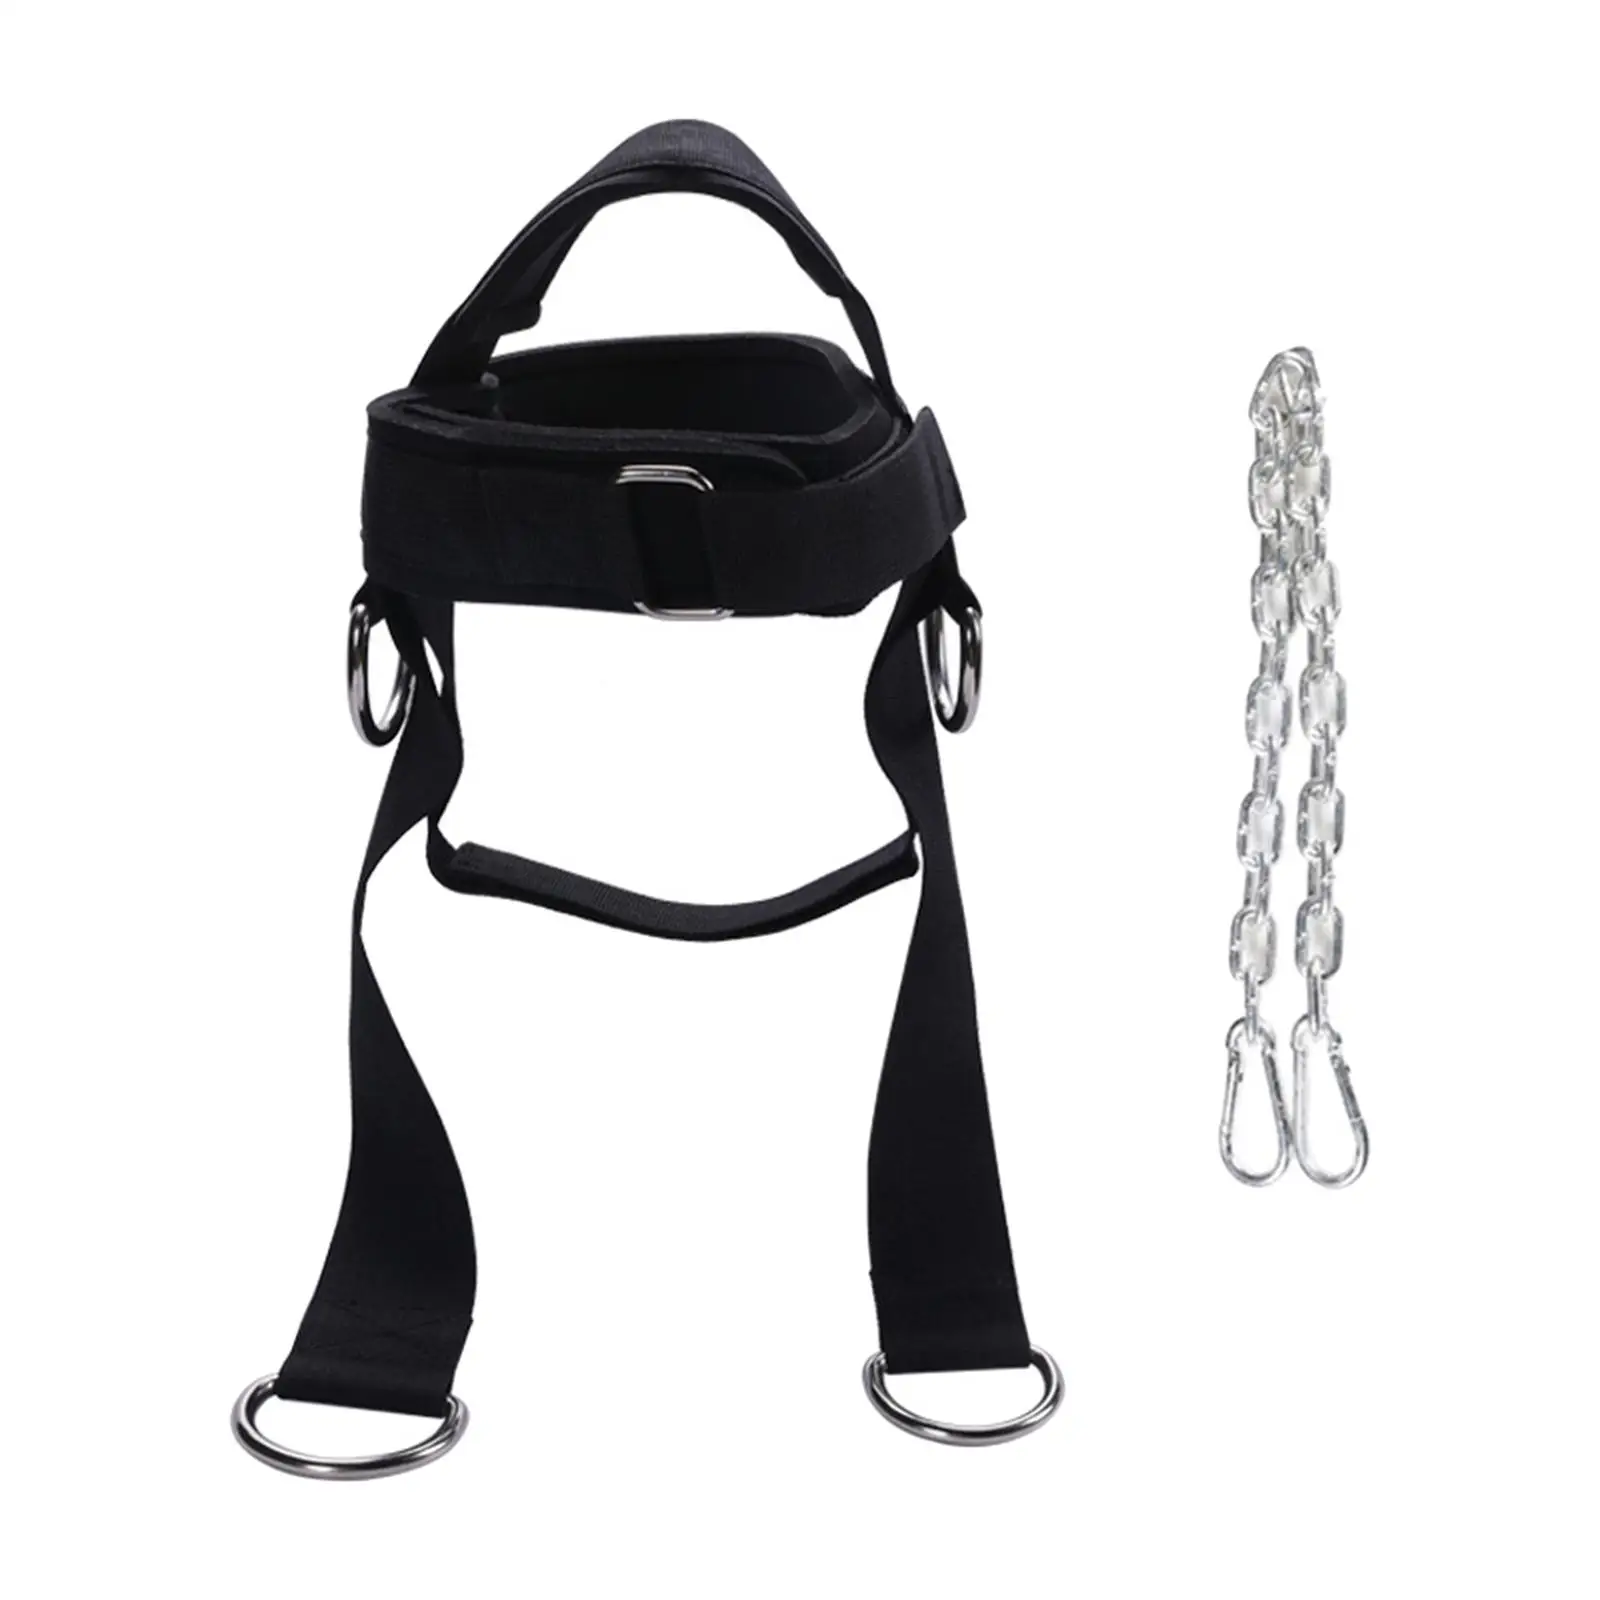 Head Harness Support with Iron Chain and Metal Loop Head Neck Training for Weight Lifting Home Gym Mma Workout Muscle Building